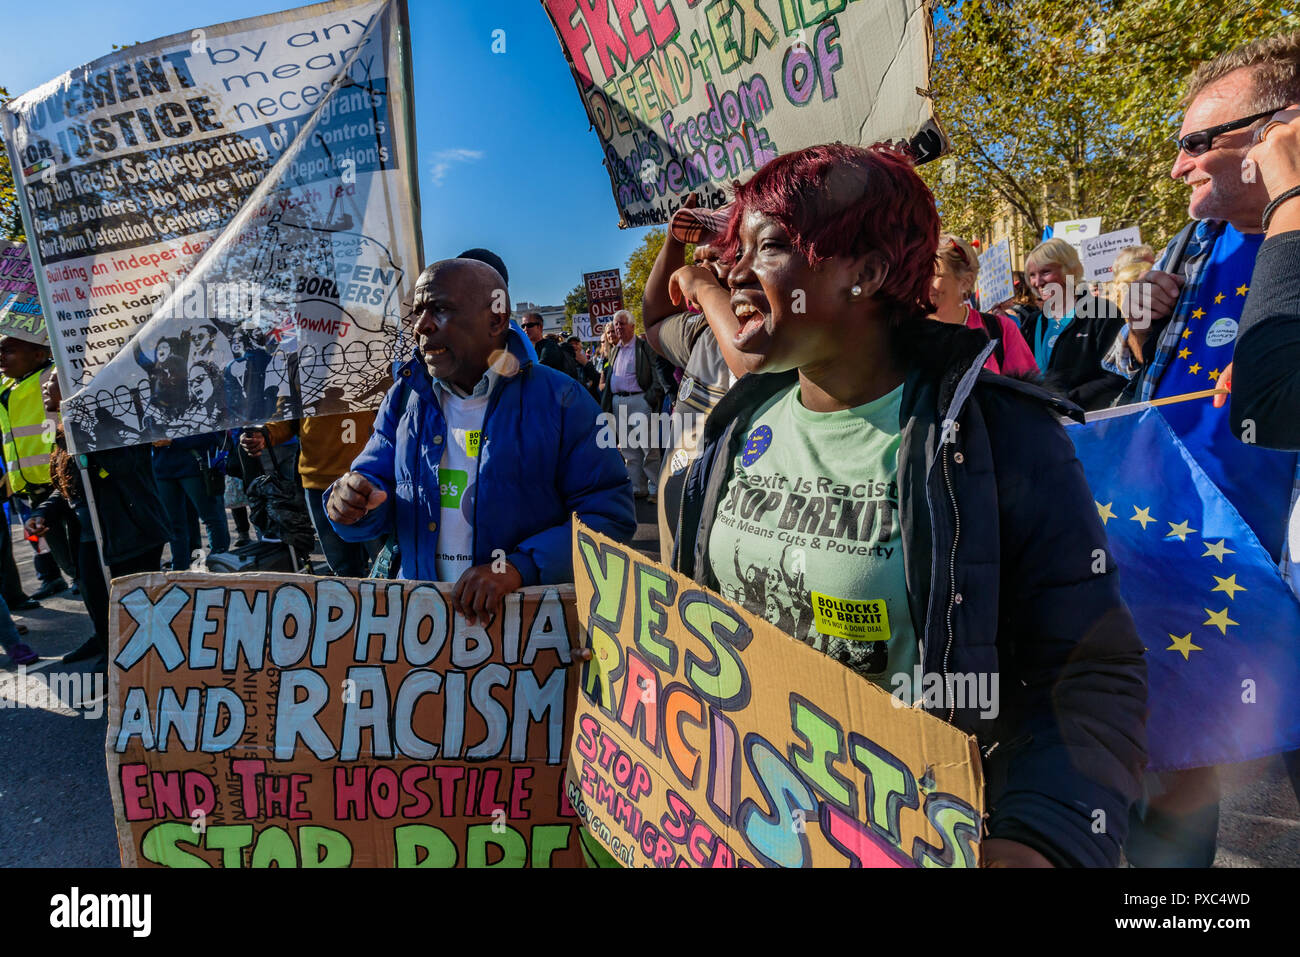 London, UK. 20th Oct 2018.  Movement for Justice protested on Piccadilly in front of the People's Vote March calling for an end to Brexit, which they is racist. They want an end to the scapegoating of immigrants and call for an end to the hostile environment which is ripping families apart, and amnesty for all those present here and to an extension of freedom of movement to include the Commonwealth. Credit: ZUMA Press, Inc./Alamy Live News Stock Photo